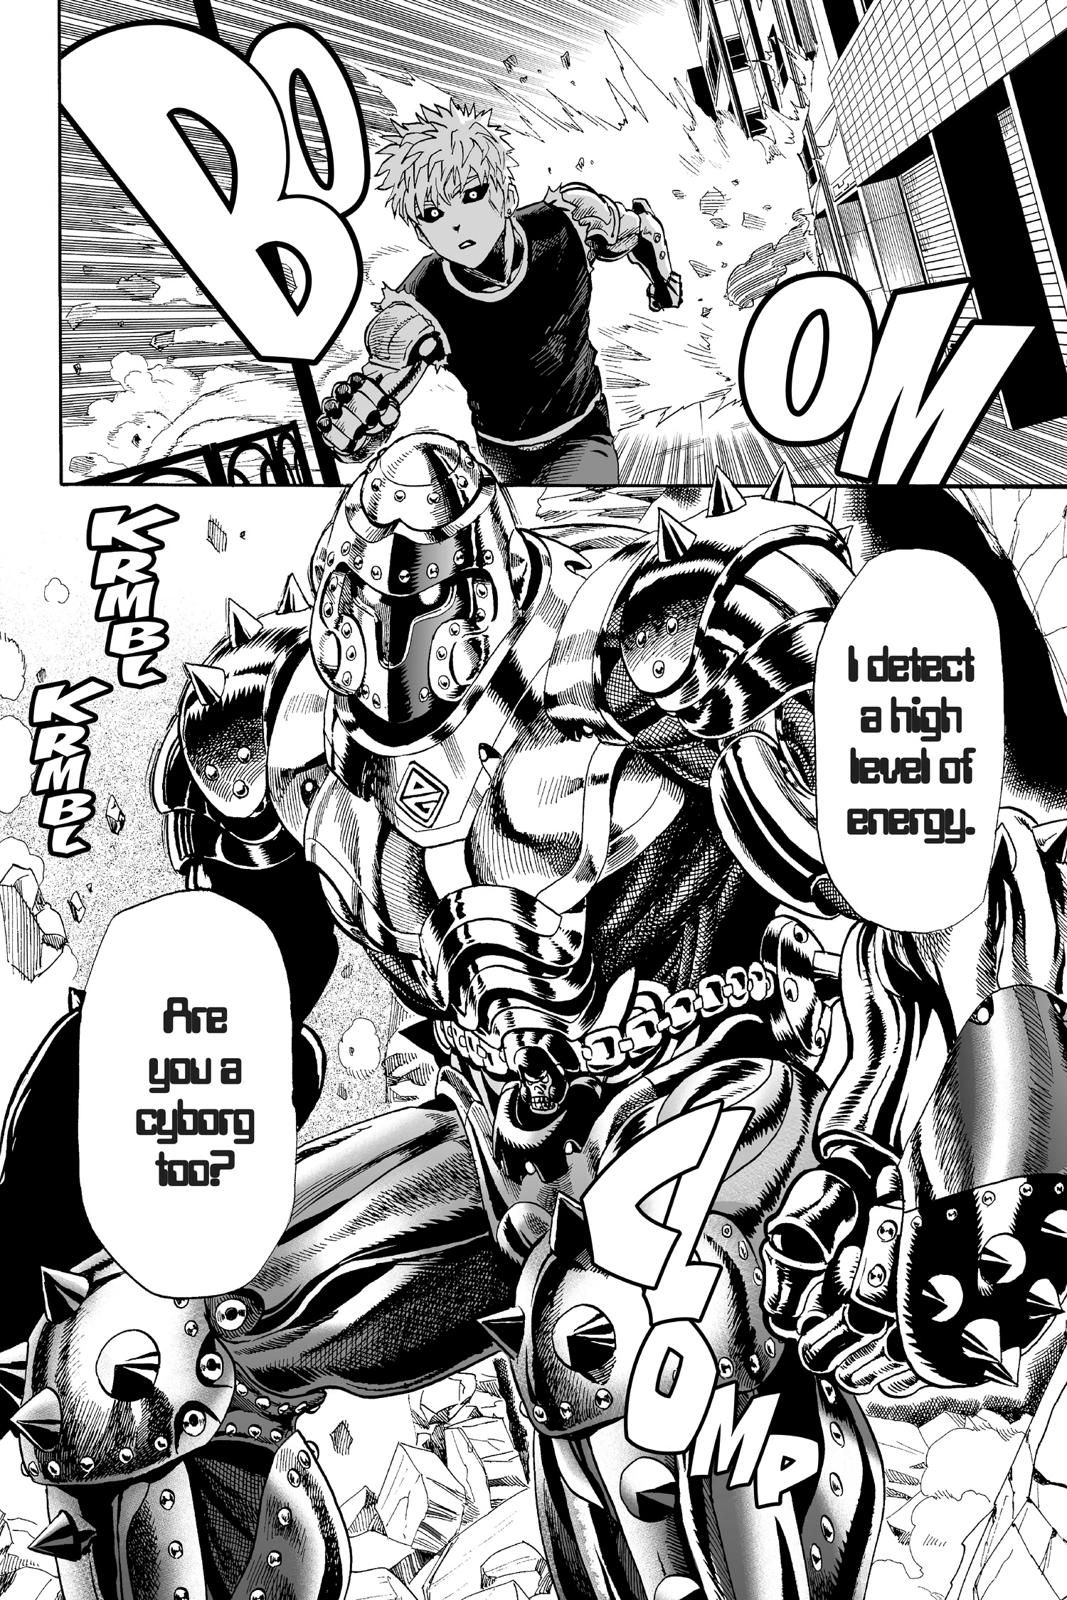 One-Punch Man, Punch 7 image 16